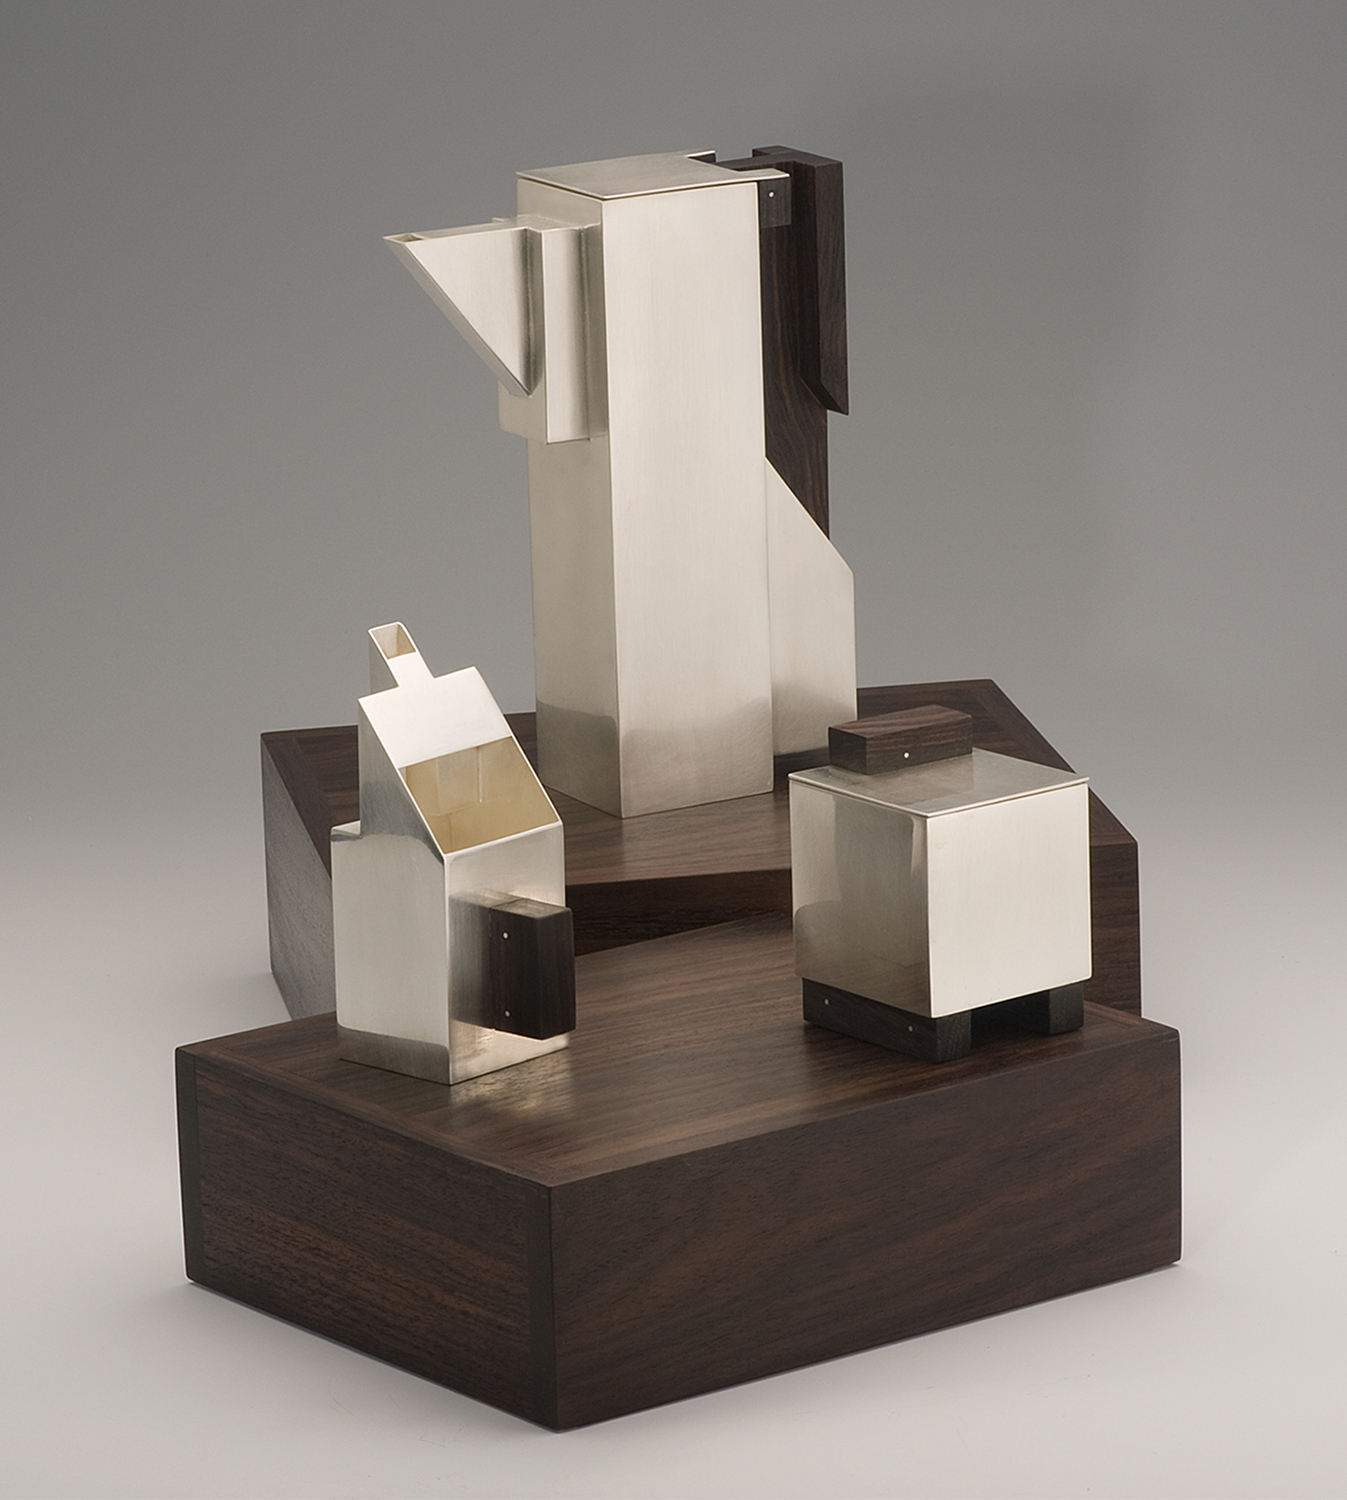 Puzzle Teaset-open  |  2010  |  sterling silver, rosewood  |  10.25 x 8.5 x 3.33 inches